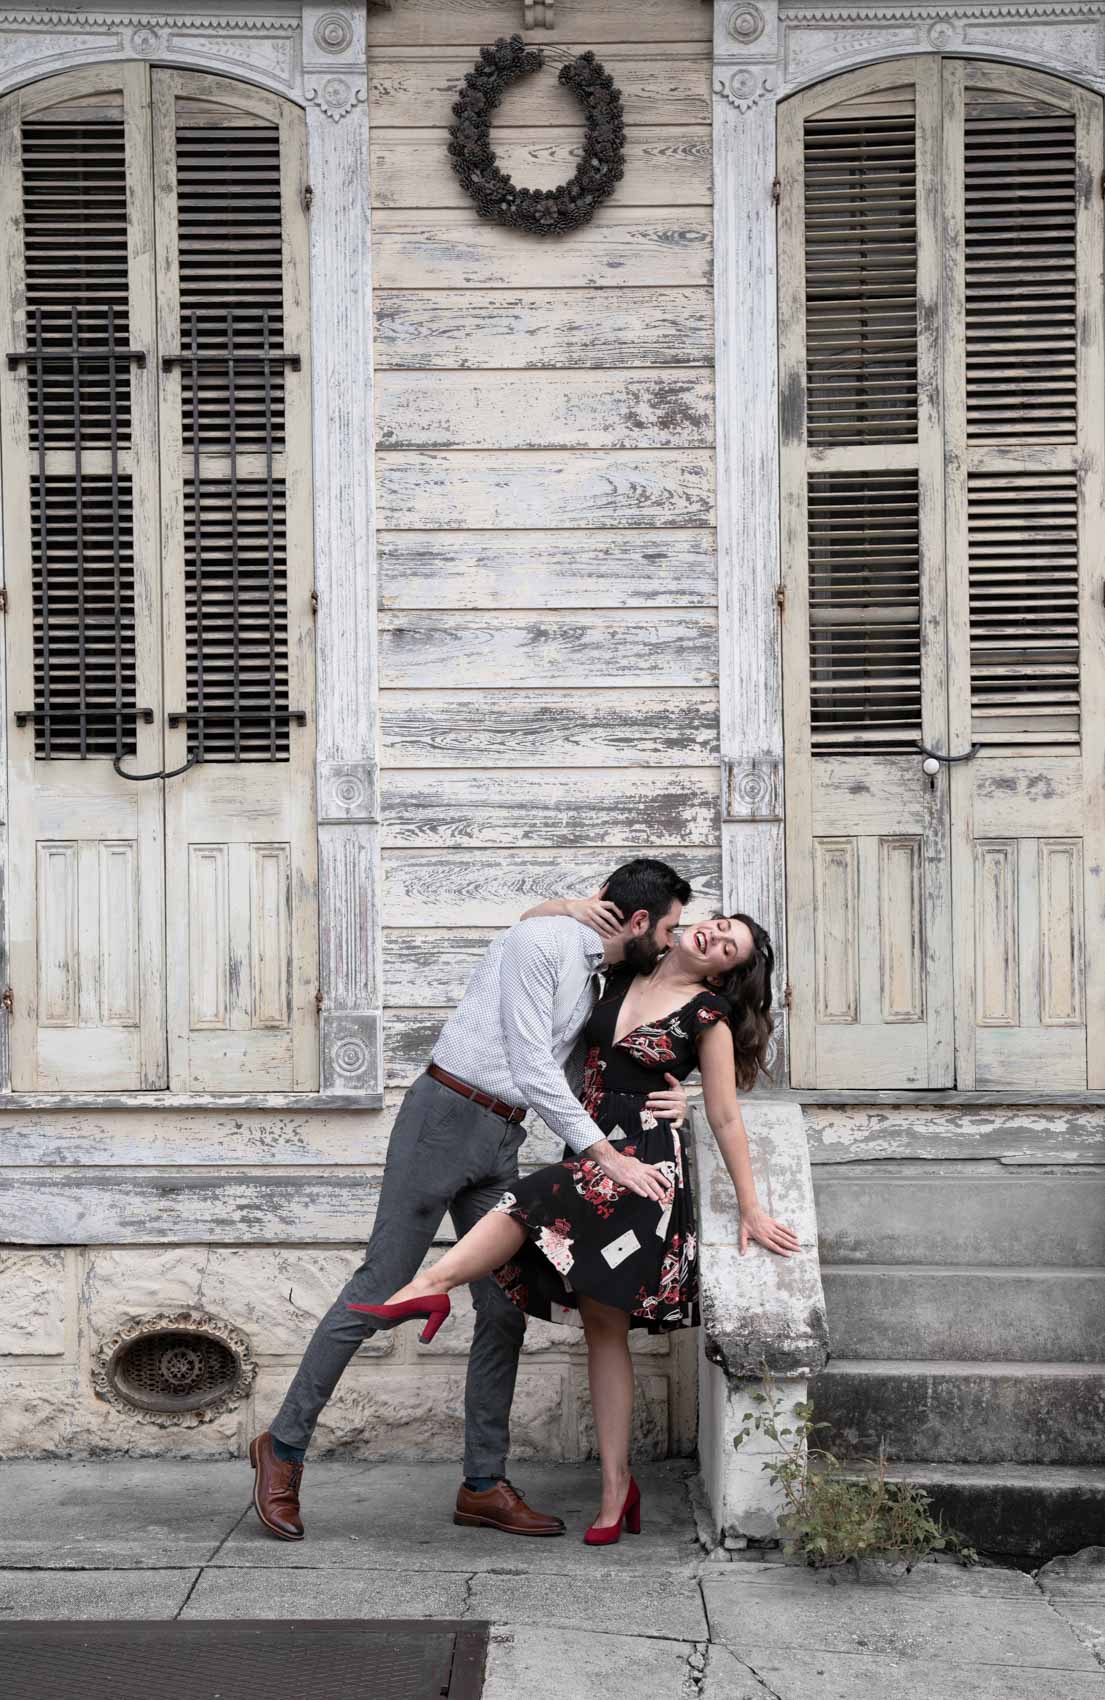 Couple kissing and dancing in the New Orleans French Quarter in front of old house